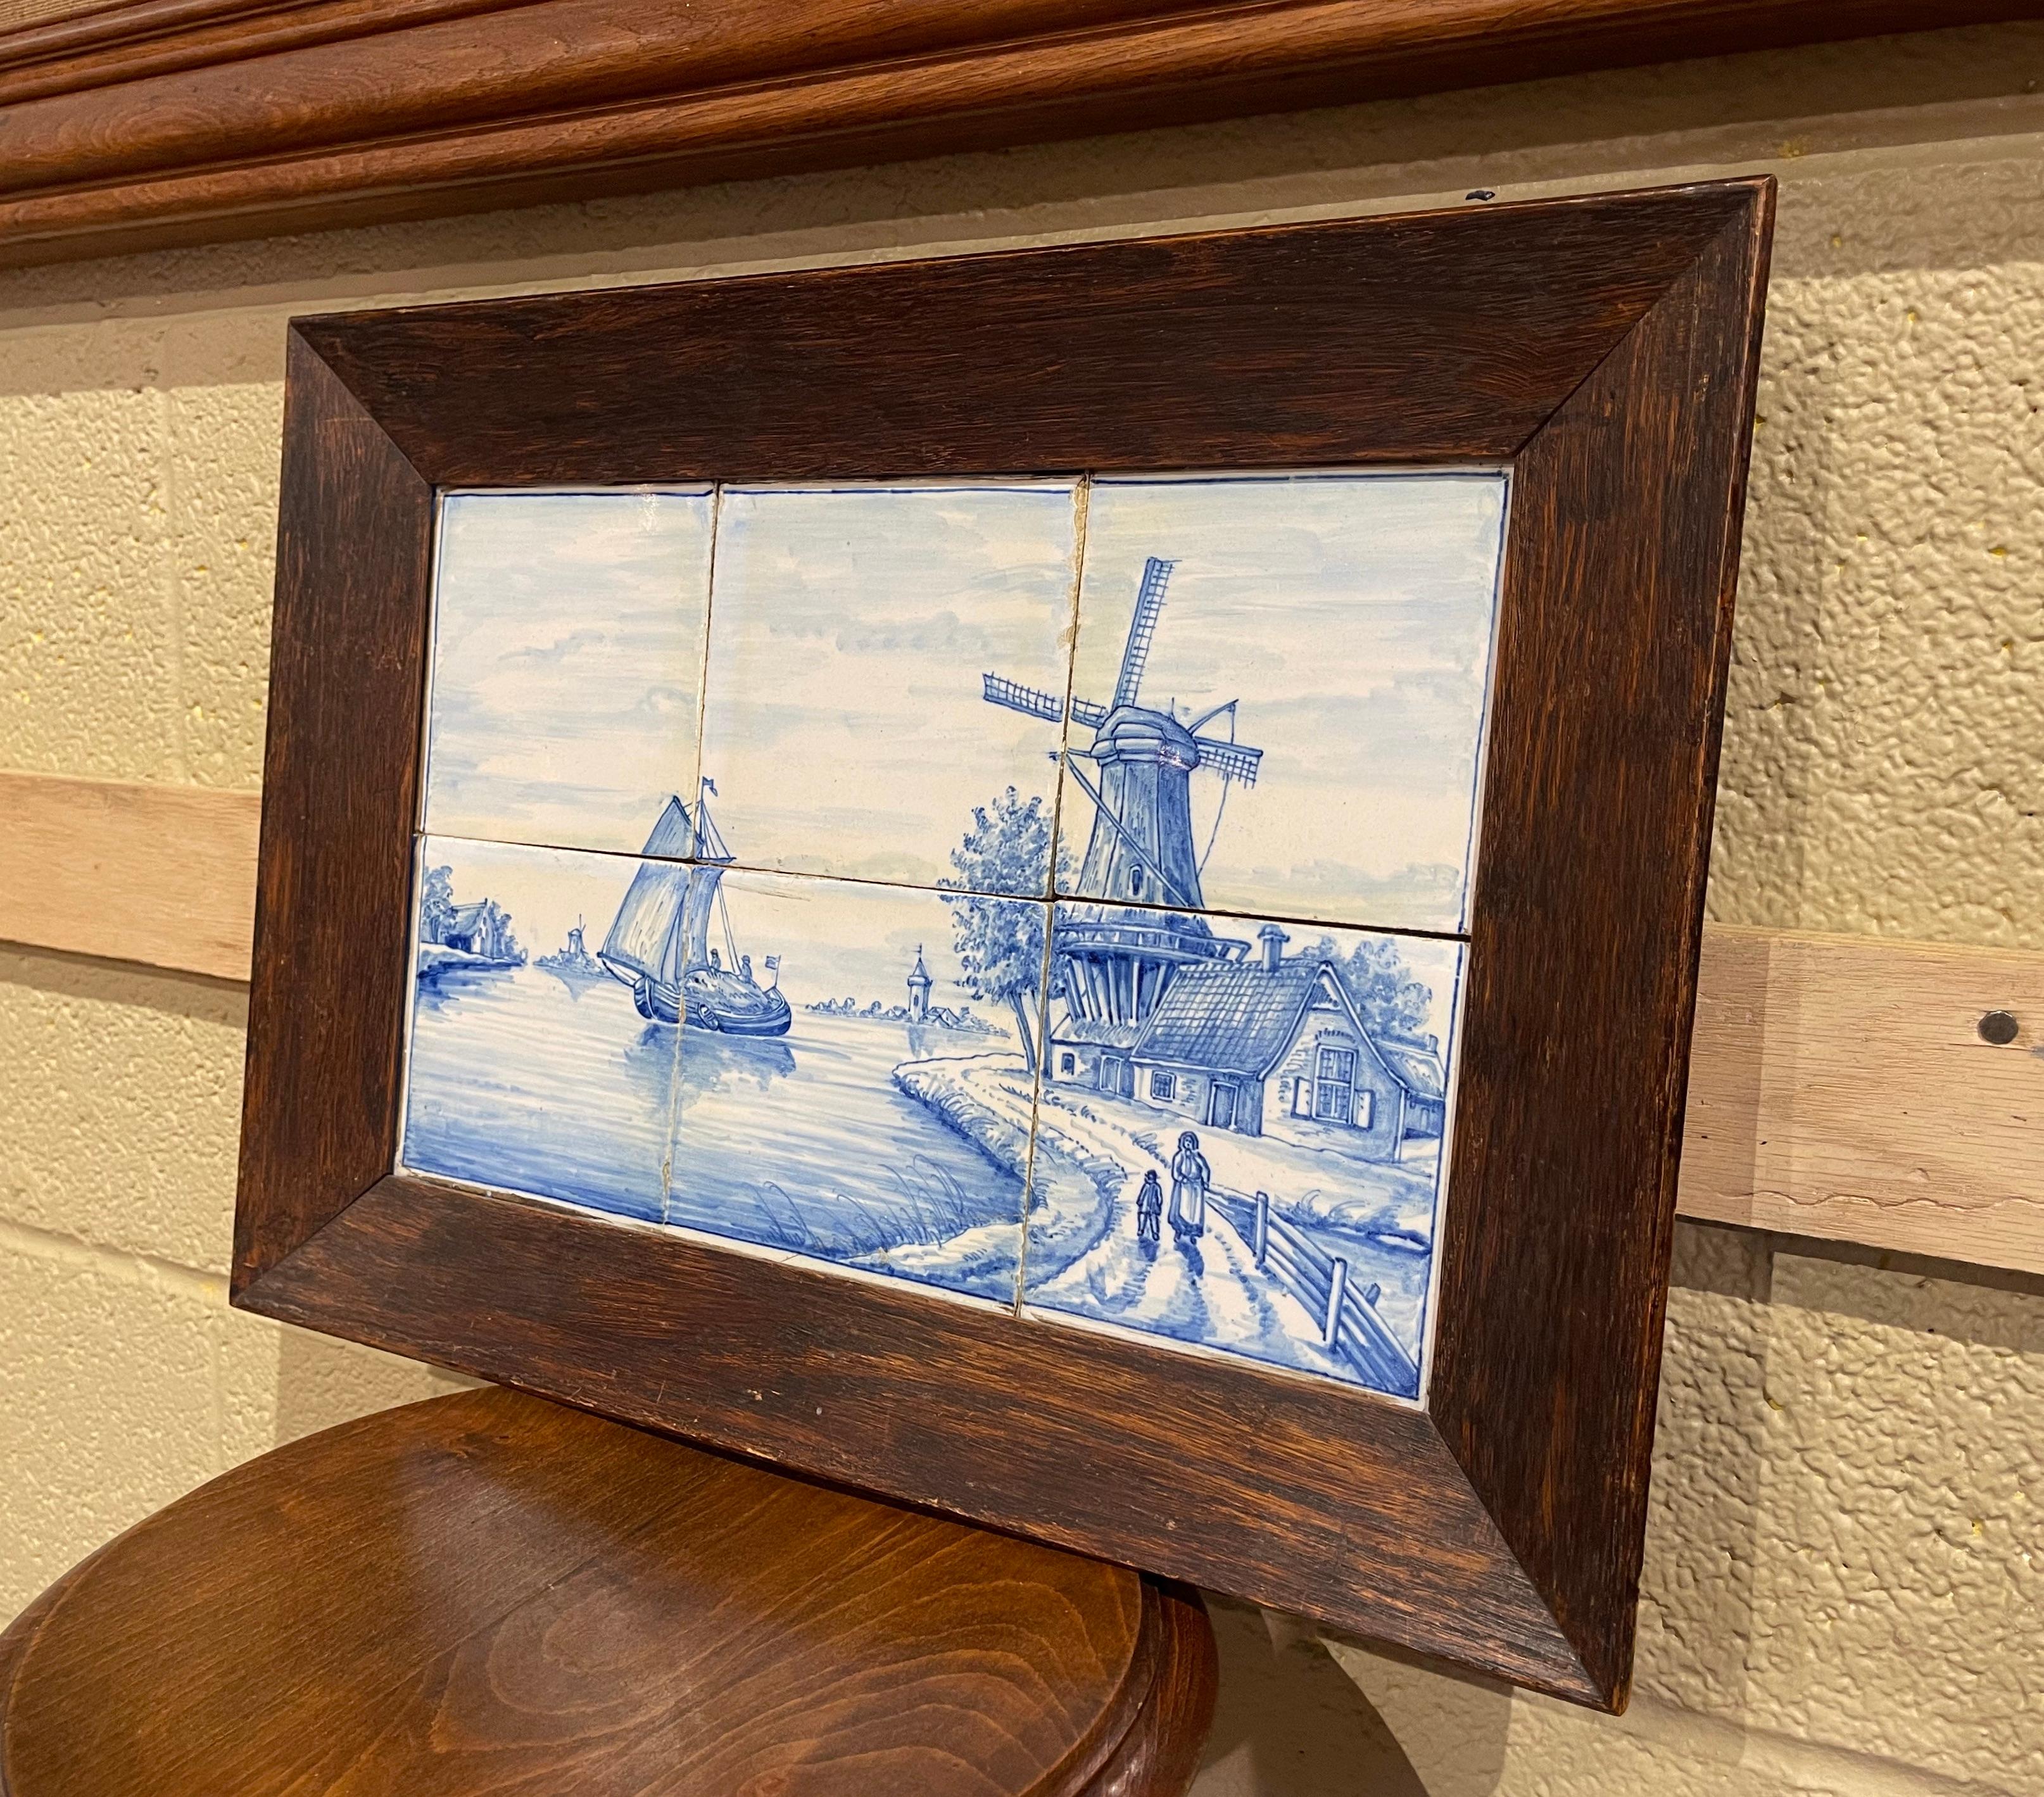 The elegant antique ceramic tile frame was created in France, circa 1860. The wall decor is set inside a carved oak frame, and features six hand painted faience tiles with illustrations typical of the traditional Delft style and coloration; the